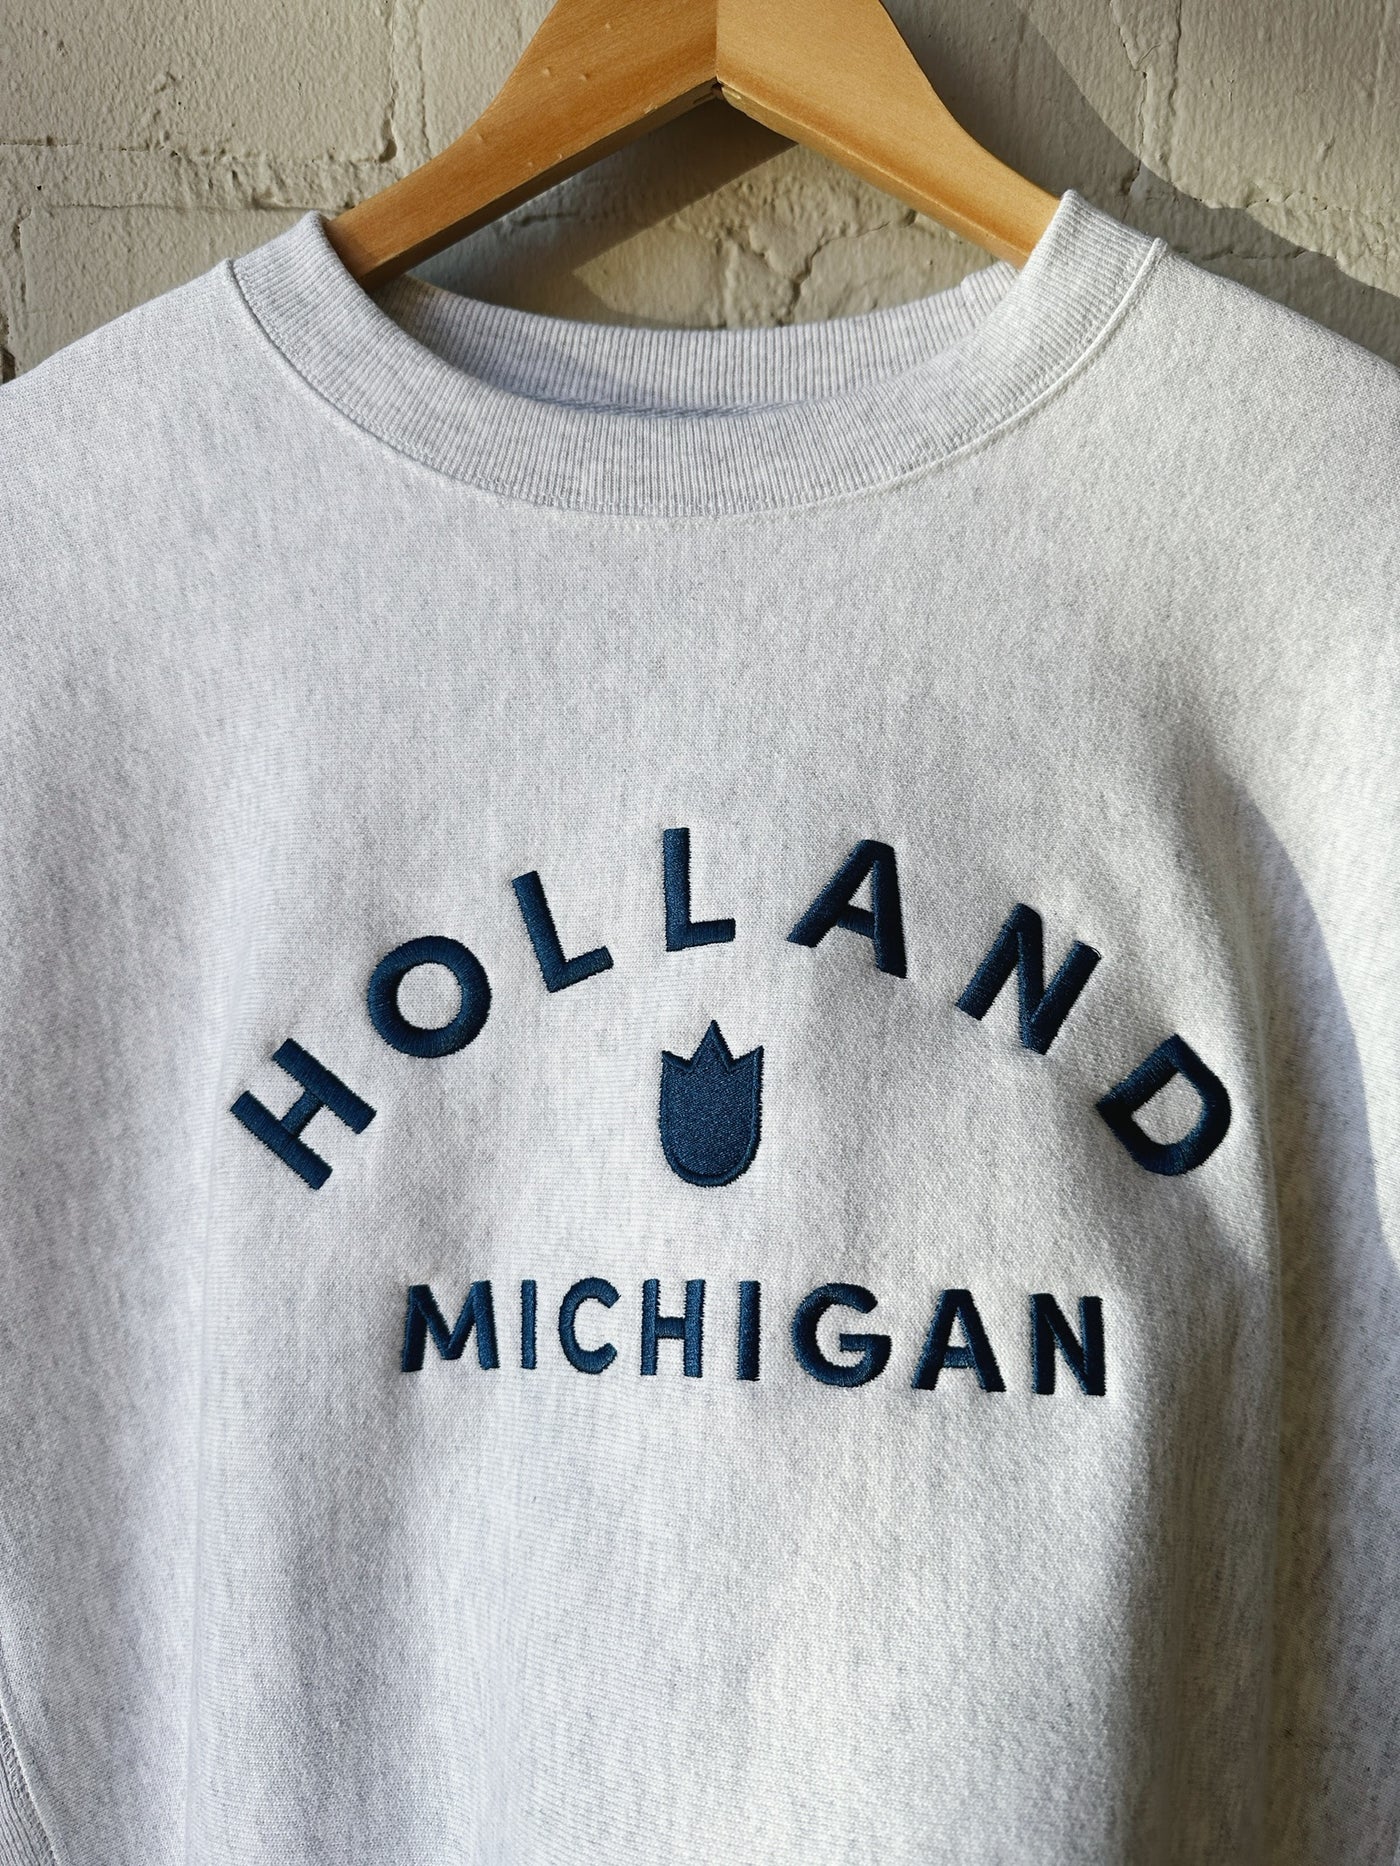 A heather grey crewneck sweatshirt with Holland Michigan and a tulip in navy embroidered on it.